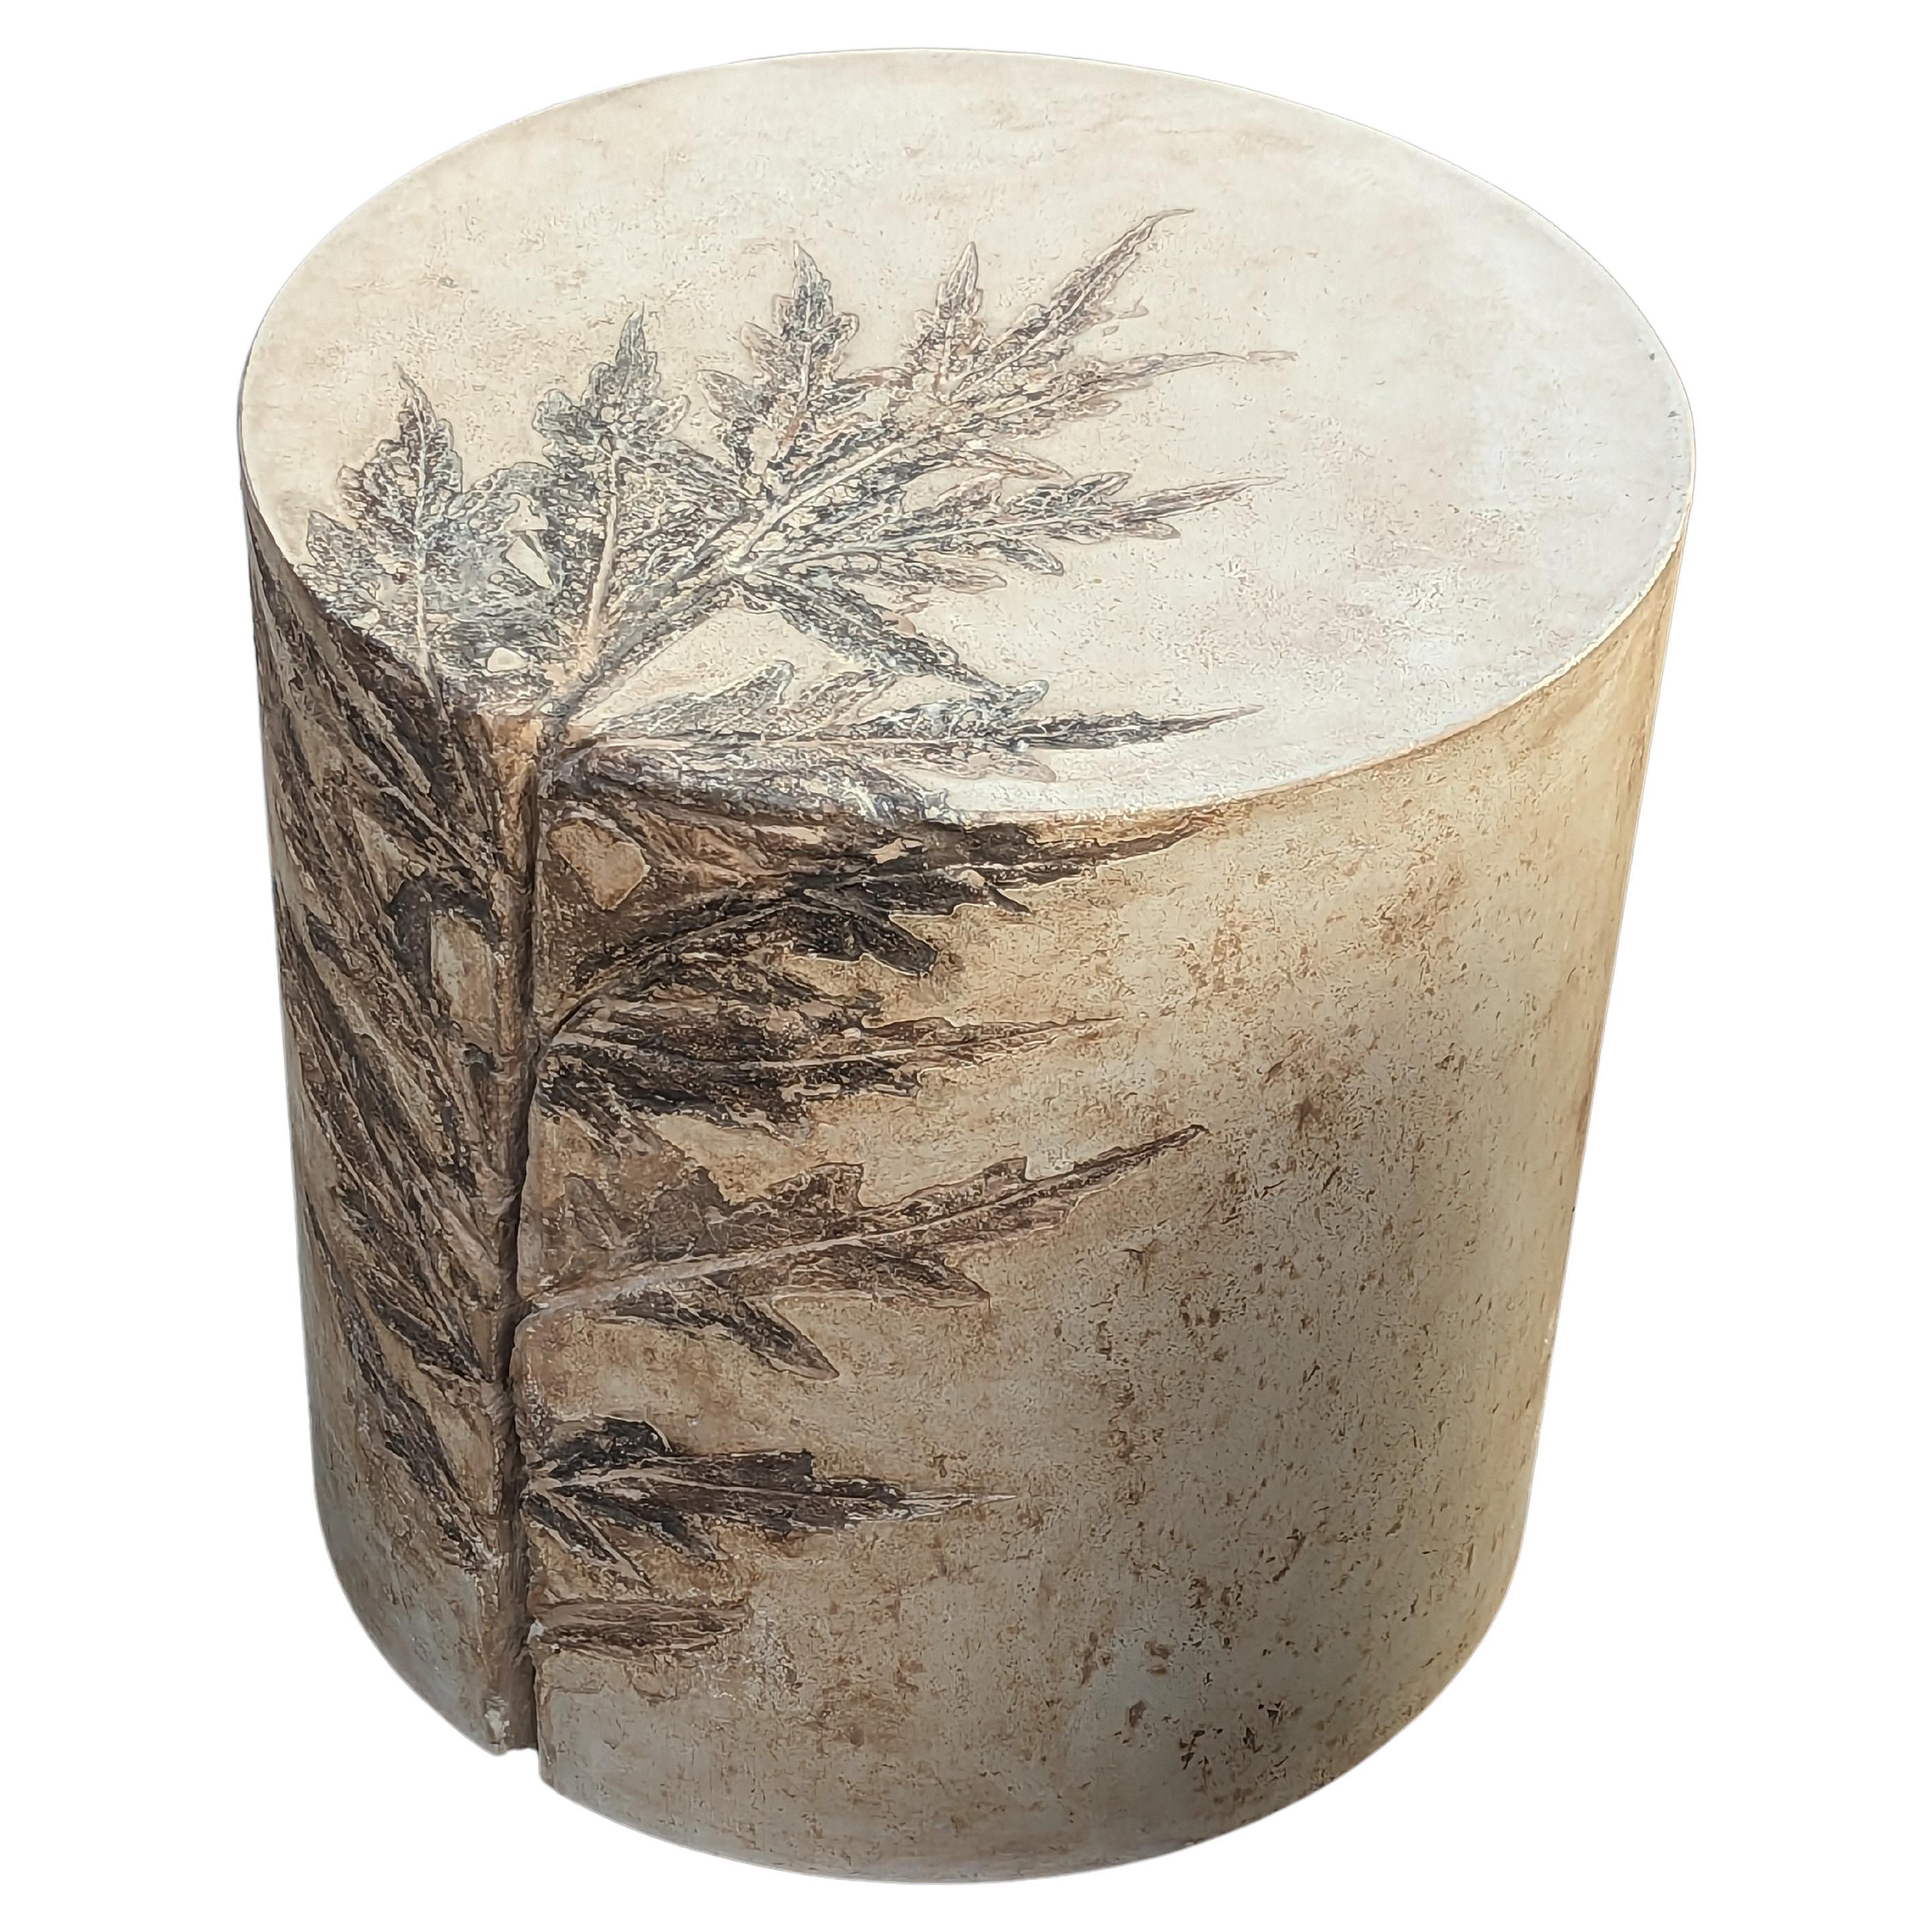 Customizable Round Concrete Stools & Side Tables with Leaf Impressions, 'Pliny' For Sale